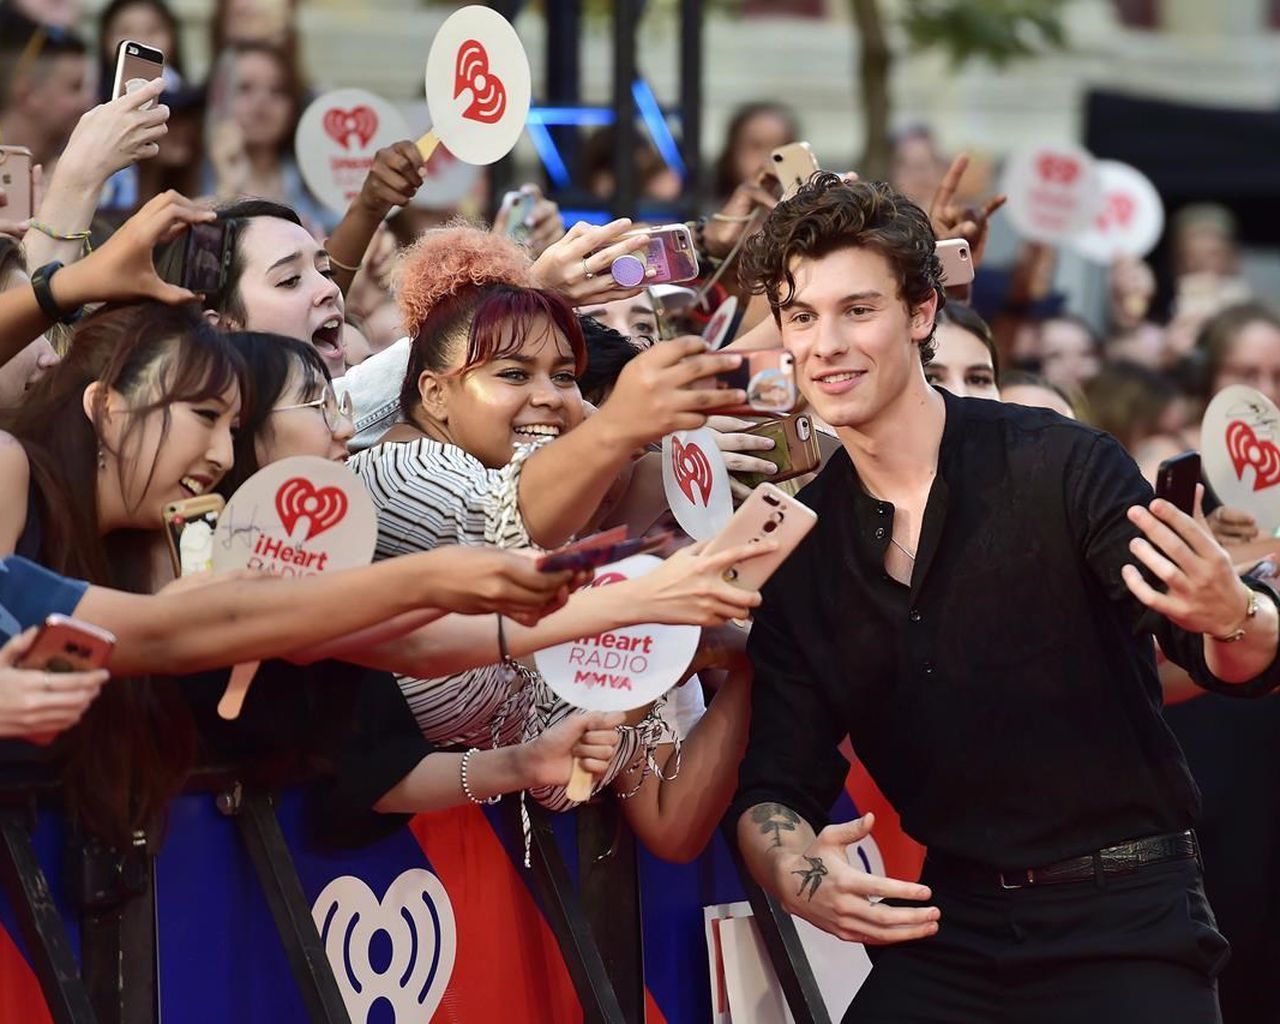 Shawn Mendes drops clues for his fans as he announces new album and single “ Wonder”